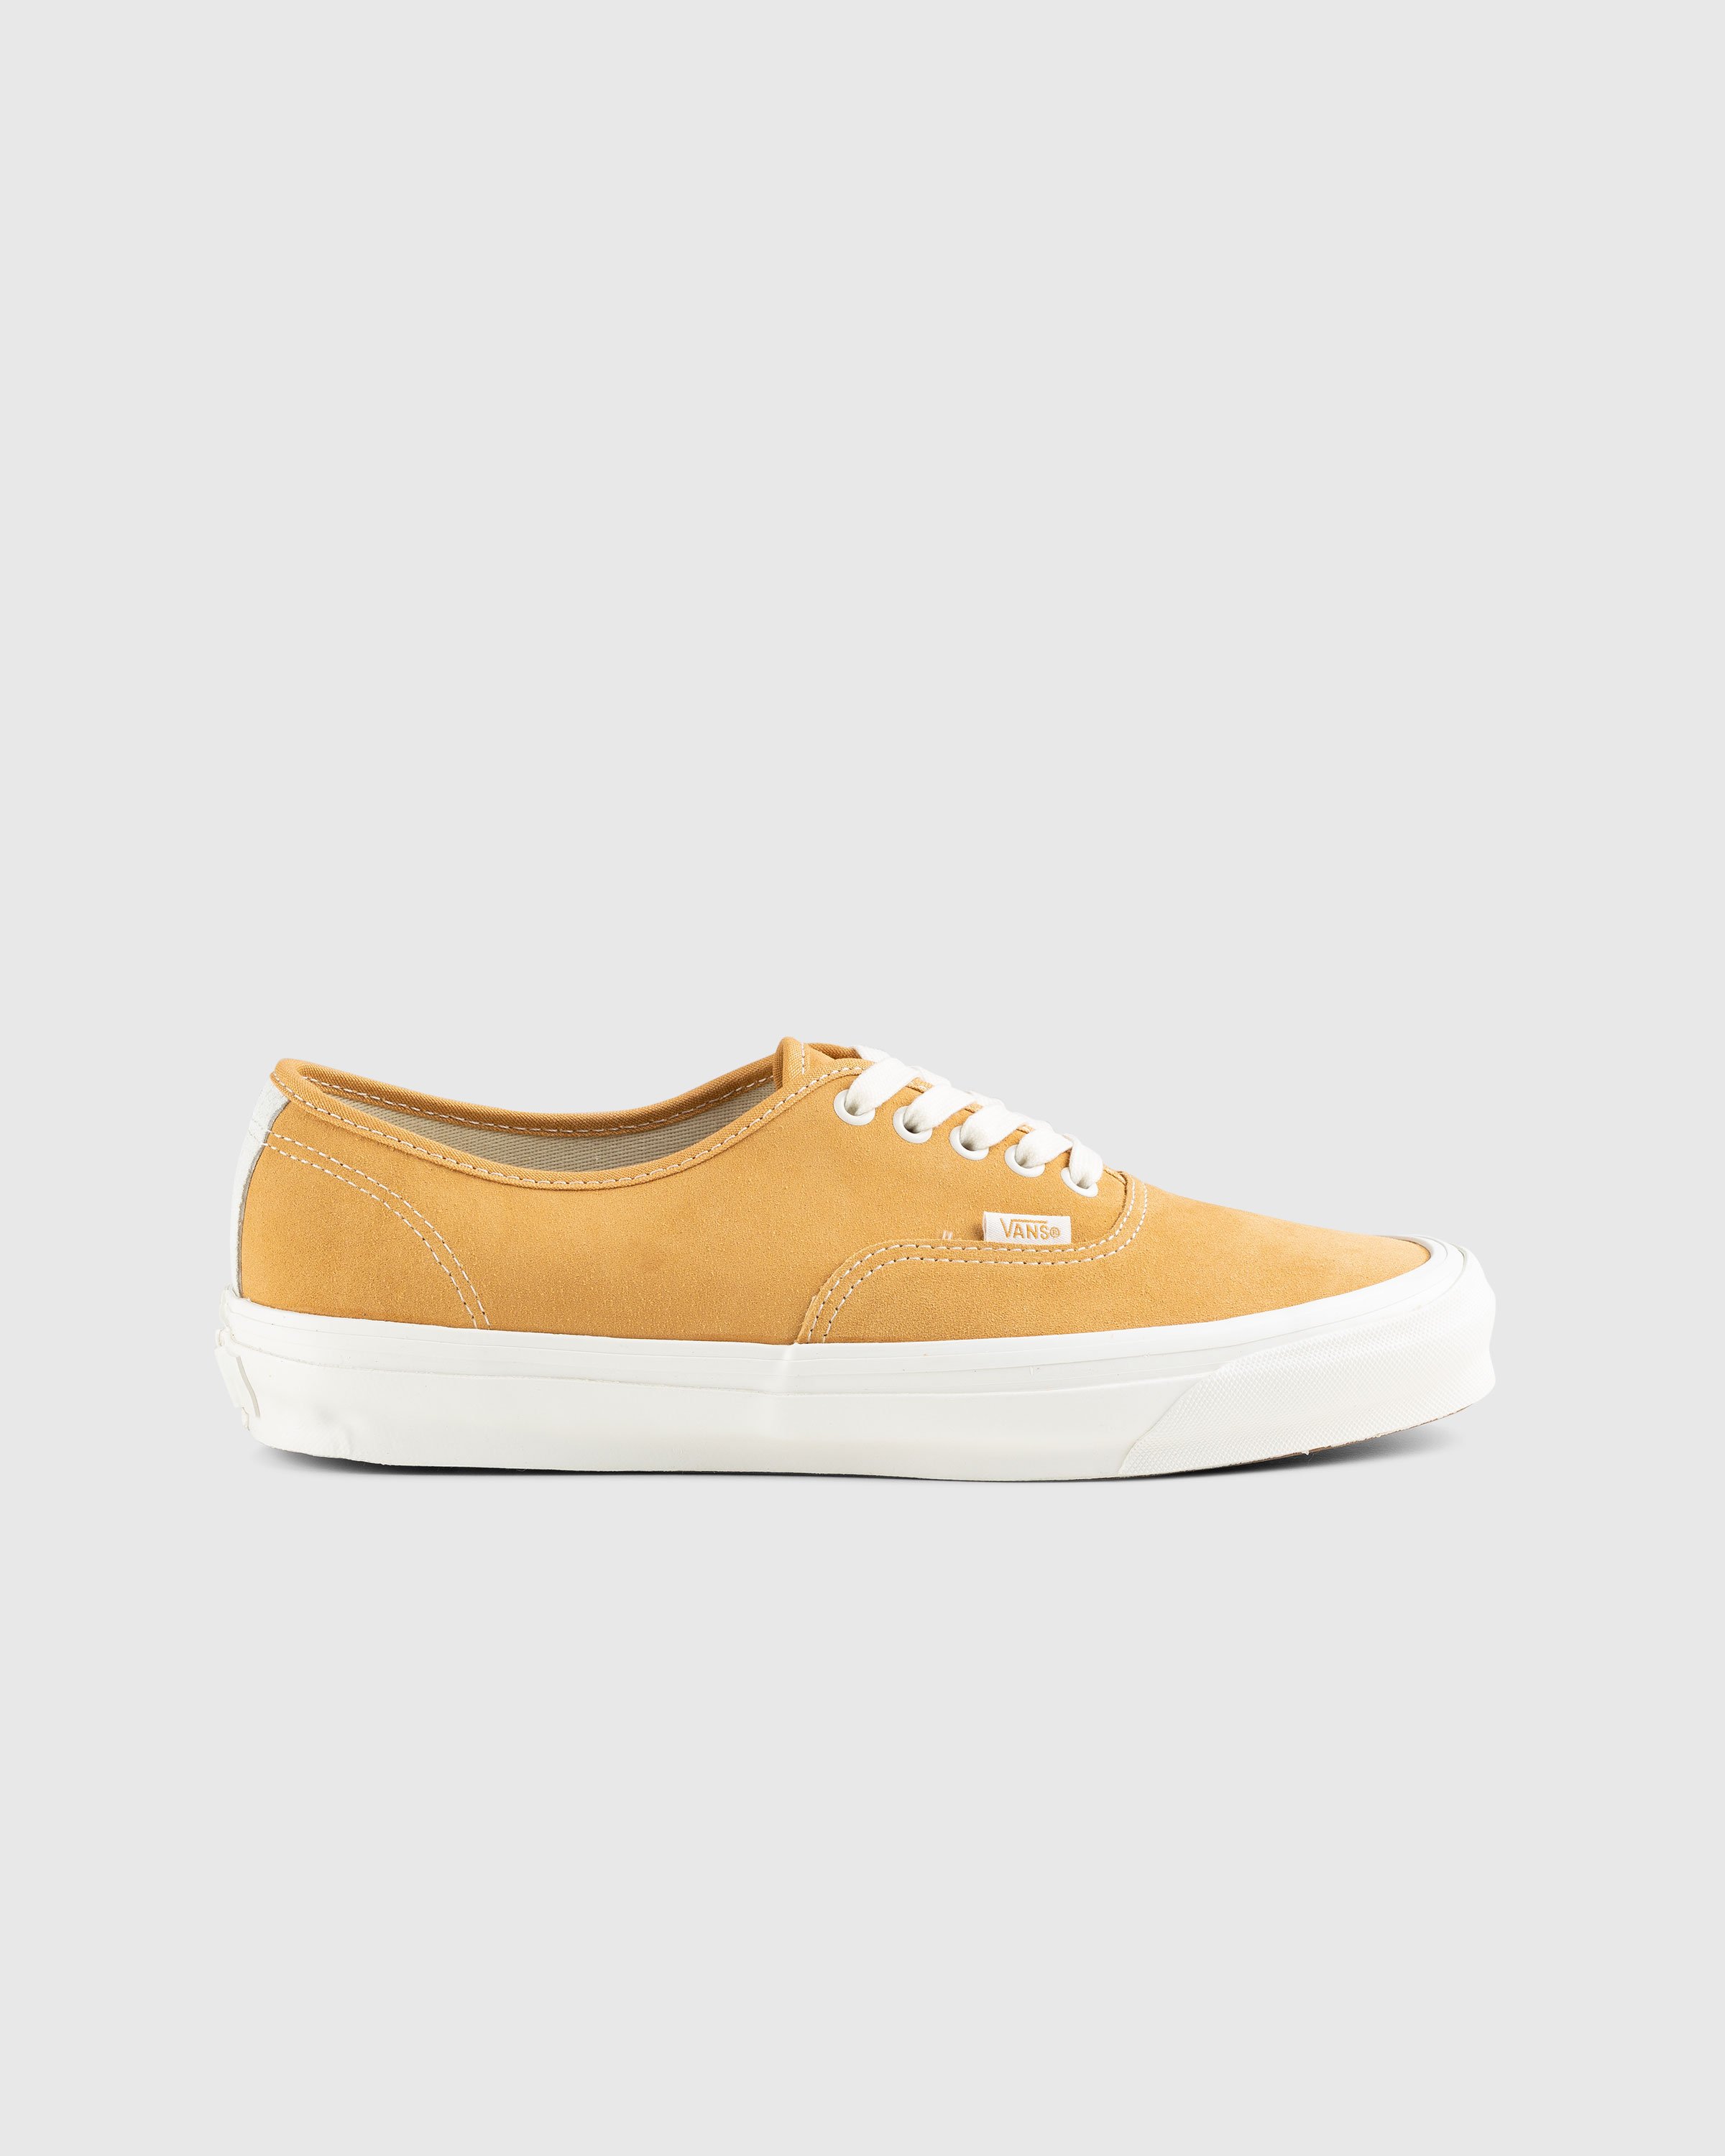 Vans - UA OG Authentic LX Suede Yellow - Footwear - Yellow - Image 1